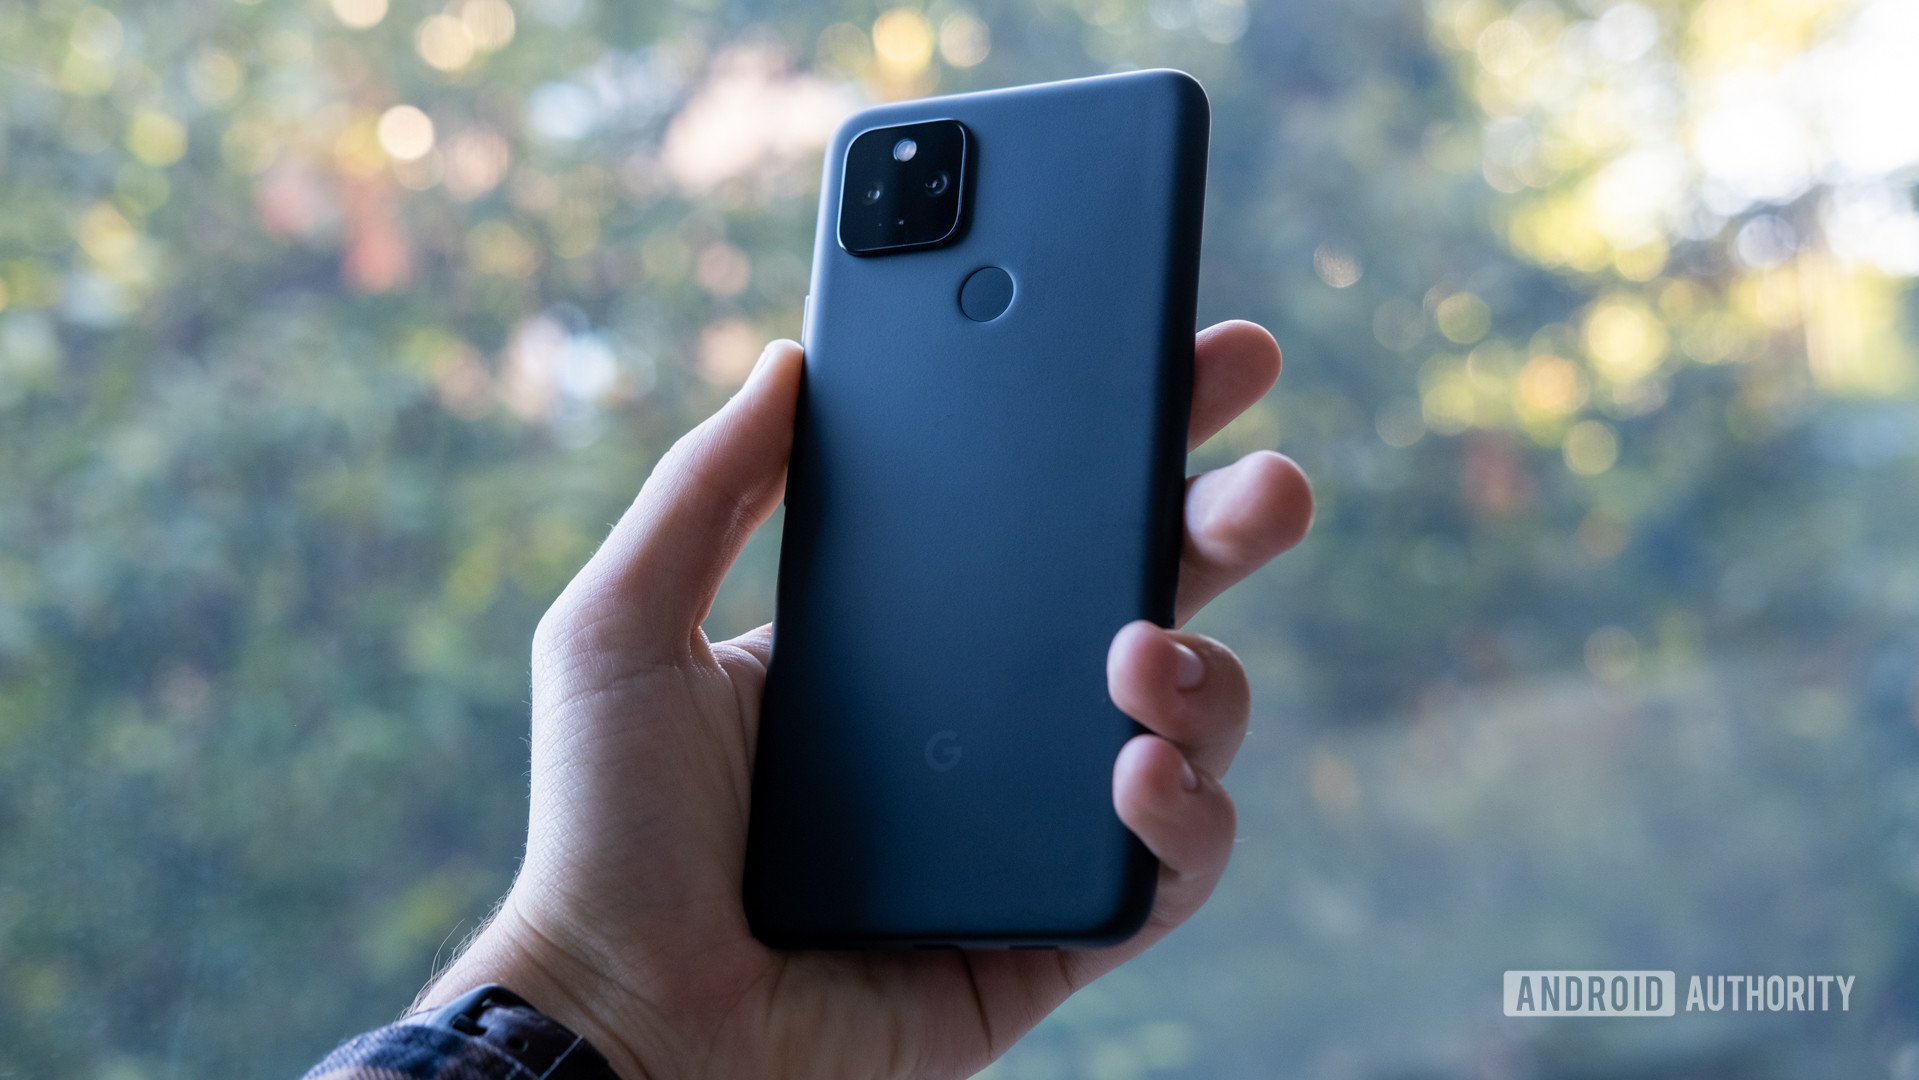 Google Pixel 4a 5G on the back of the phone